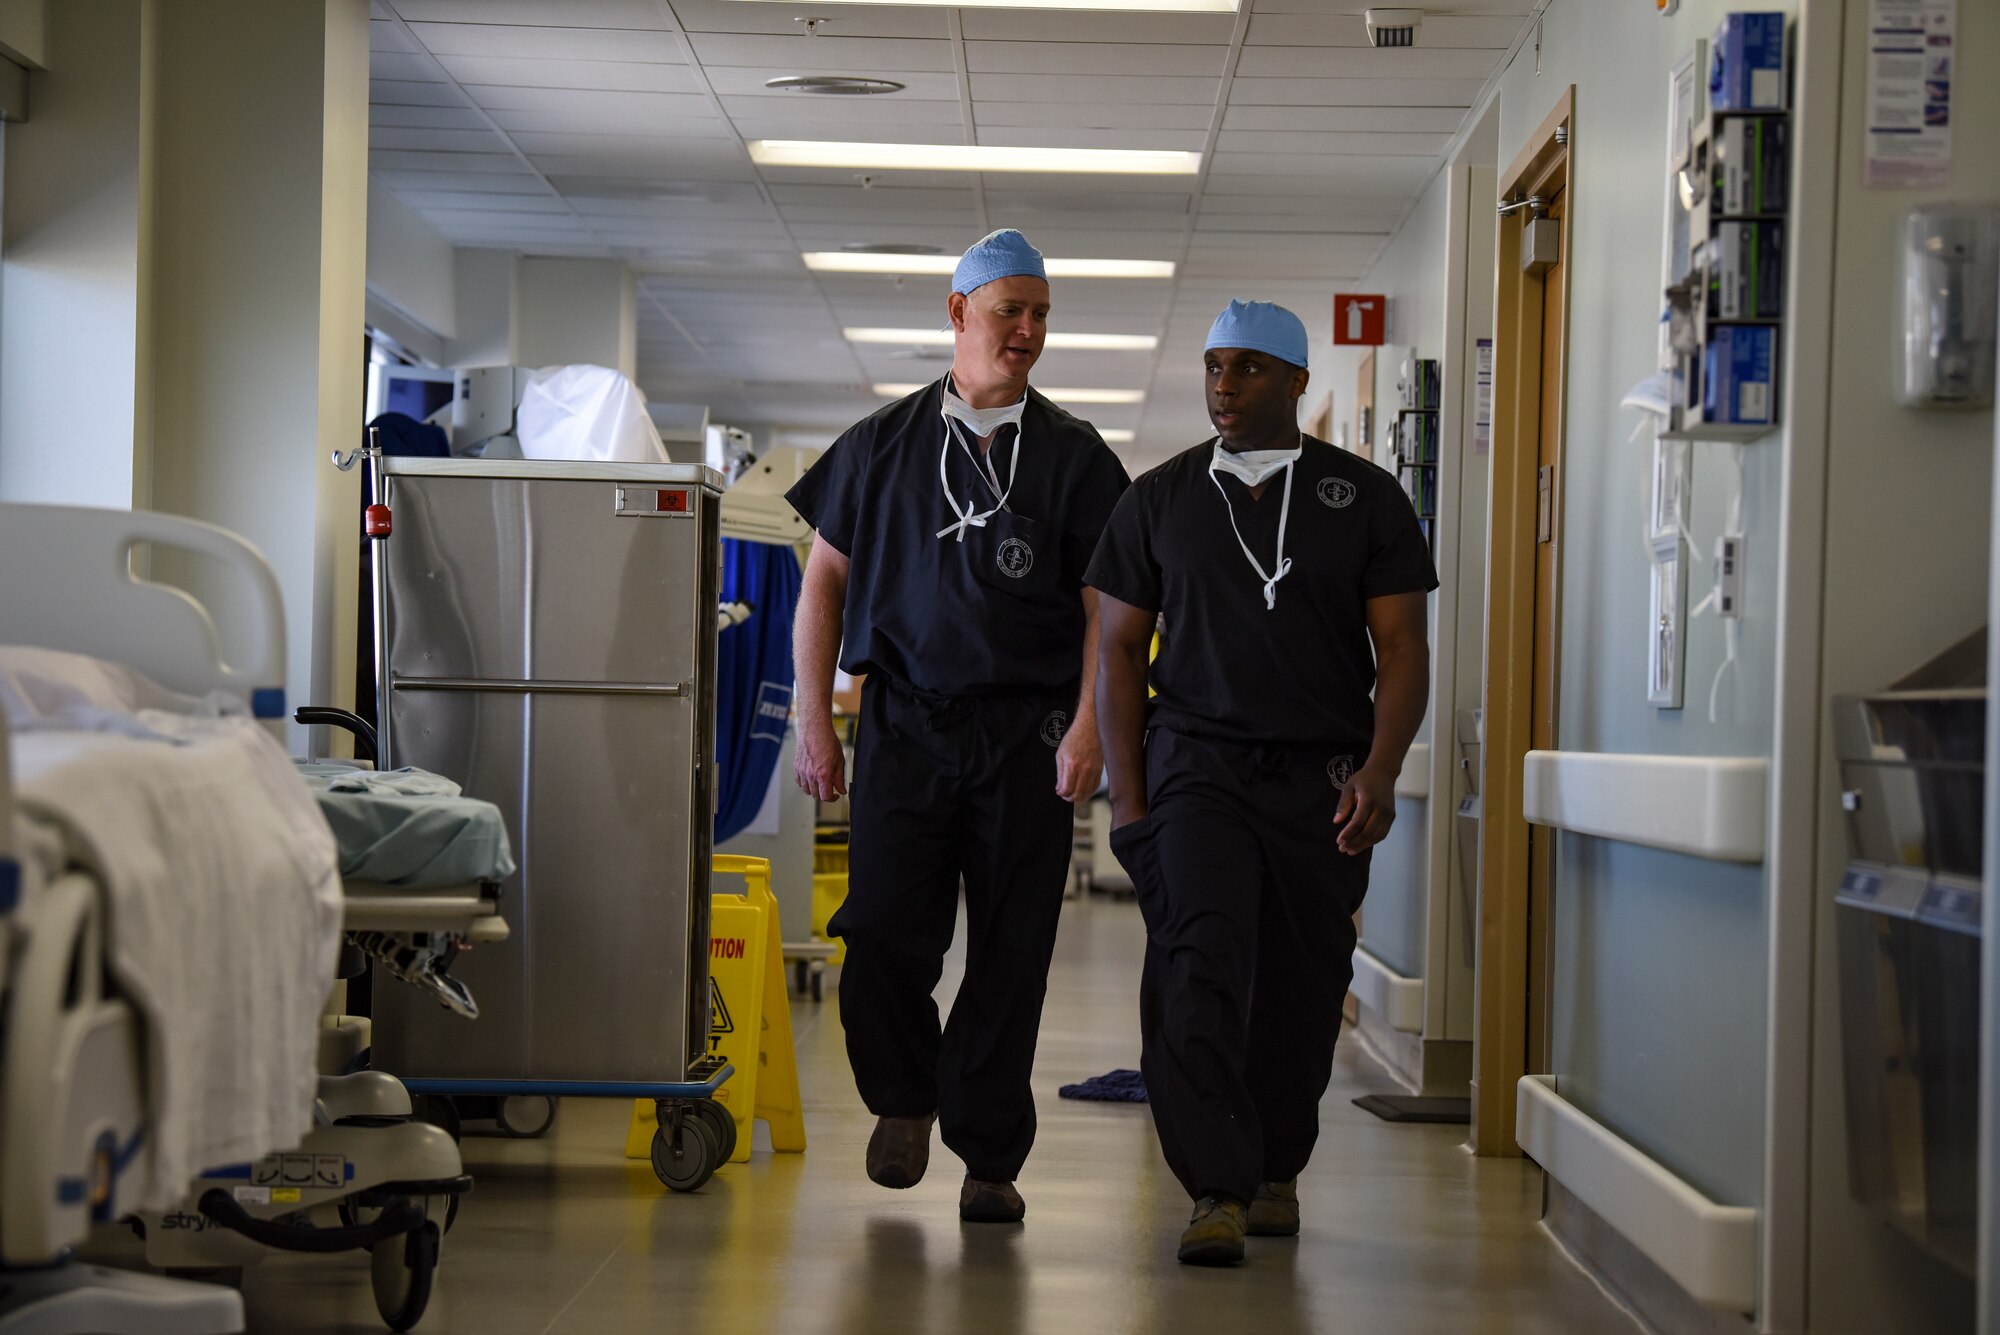 Col. (Dr.) Edward Anderson and Maj. (Dr.) Bryan Lawson, 99th Medical Group orthopedic spine surgeons, walk down a hallway at Nelis Air Force Base, Nevada, Aug. 23, 2018. Anderson and Lawson have known each other for nearly a decade. (U.S. Air Force photo by Airman 1st Class Andrew D. Sarver)